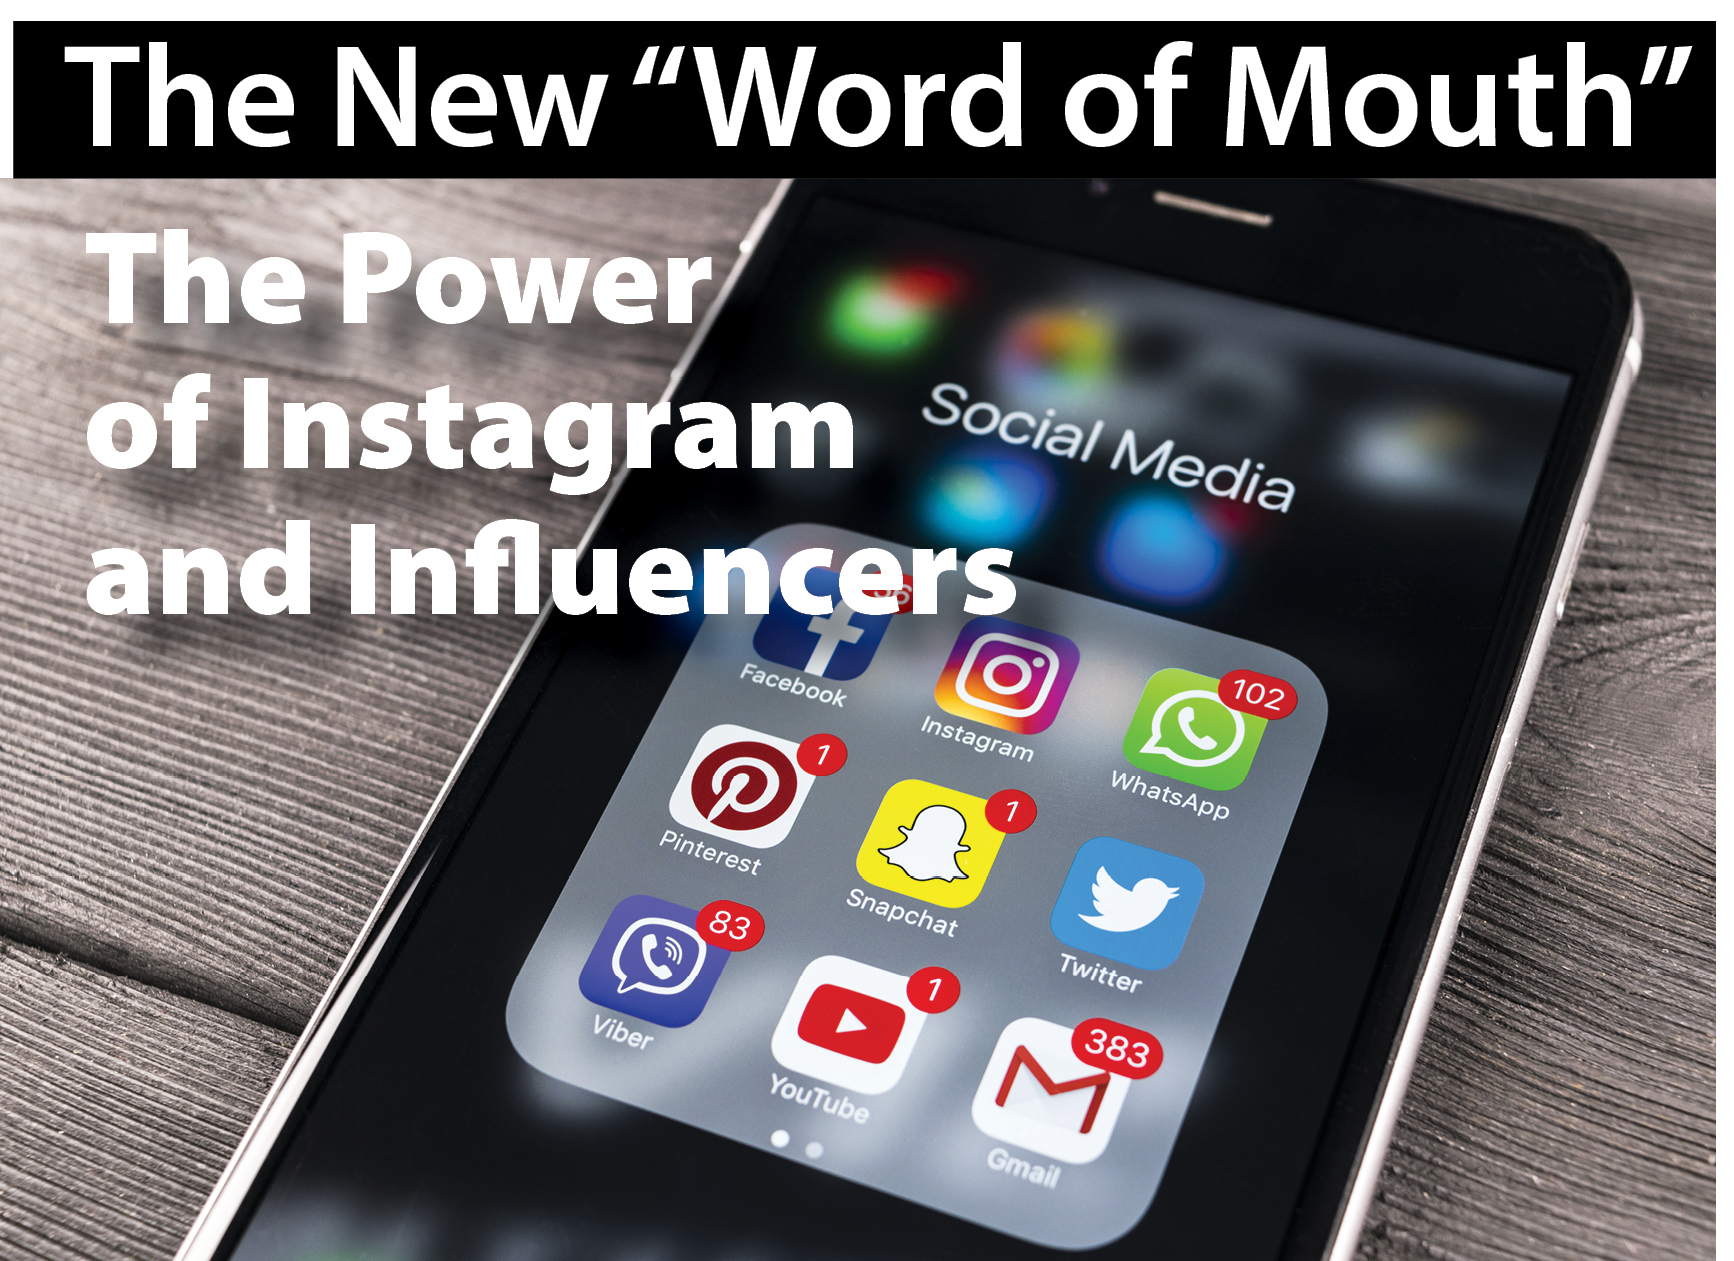 SOLD OUT! November Business Luncheon: The New "Word of Mouth" - The Power of Instagram and Influencers